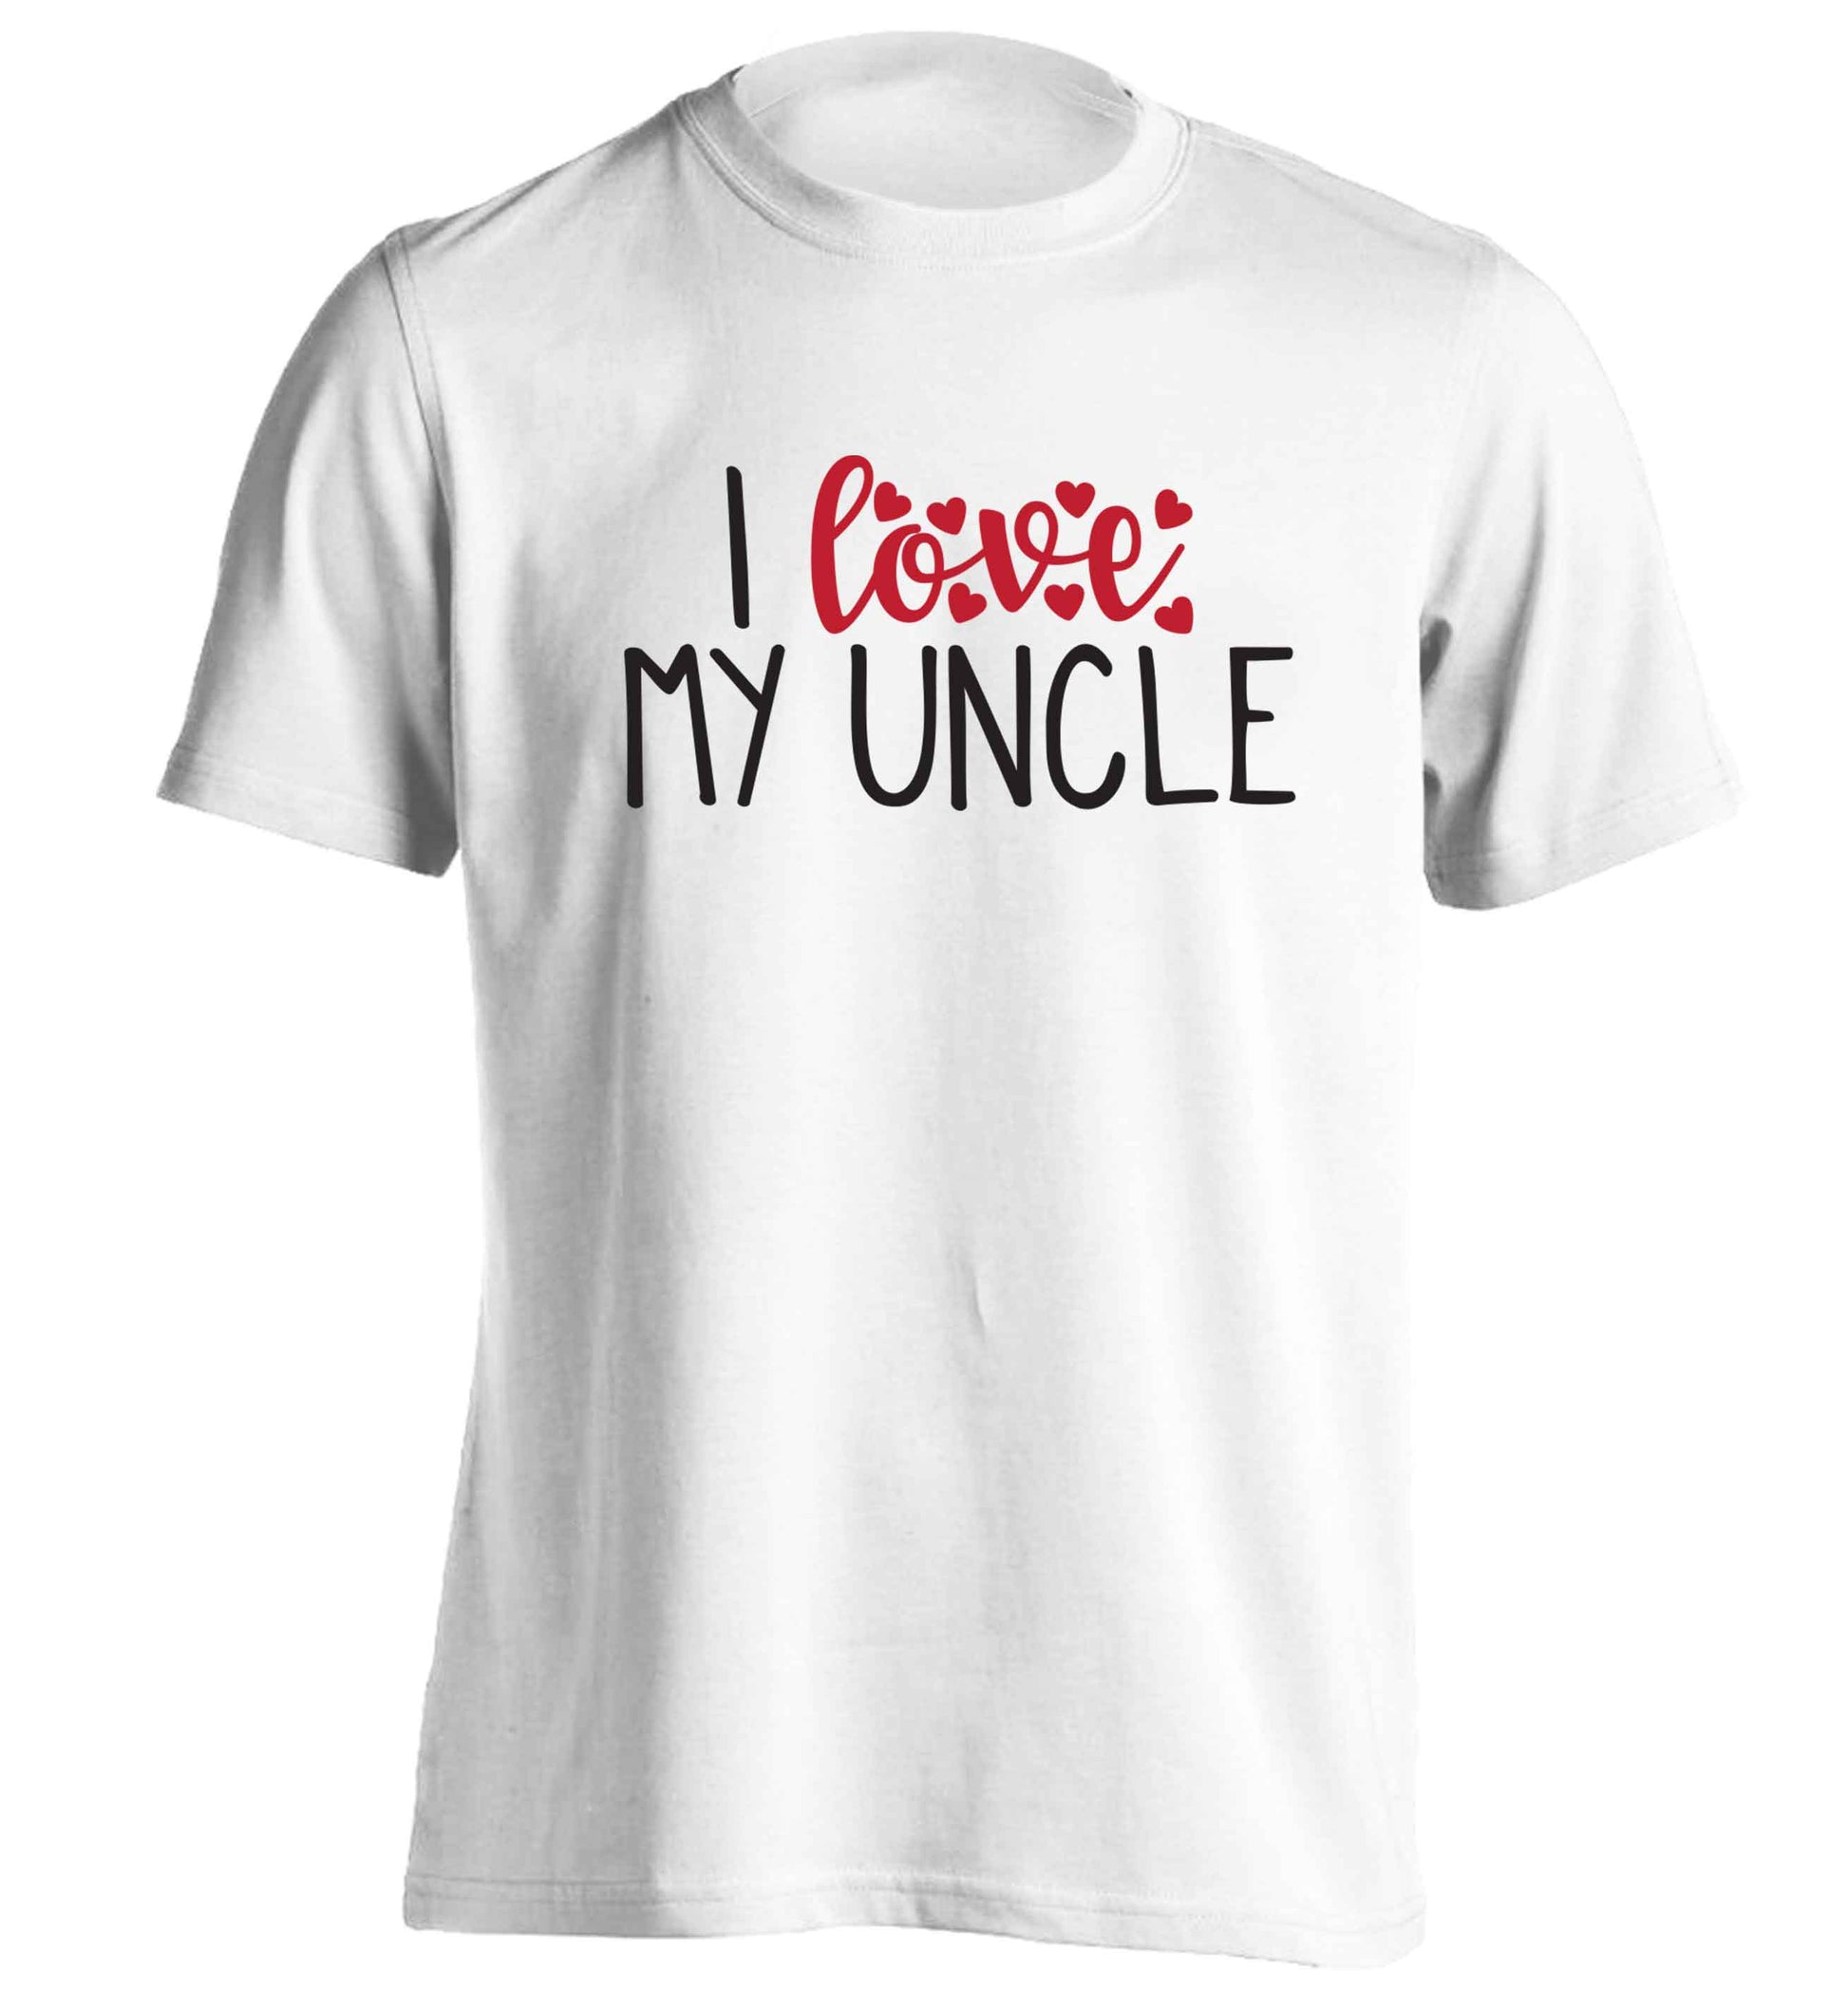 I love my uncle adults unisex white Tshirt 2XL